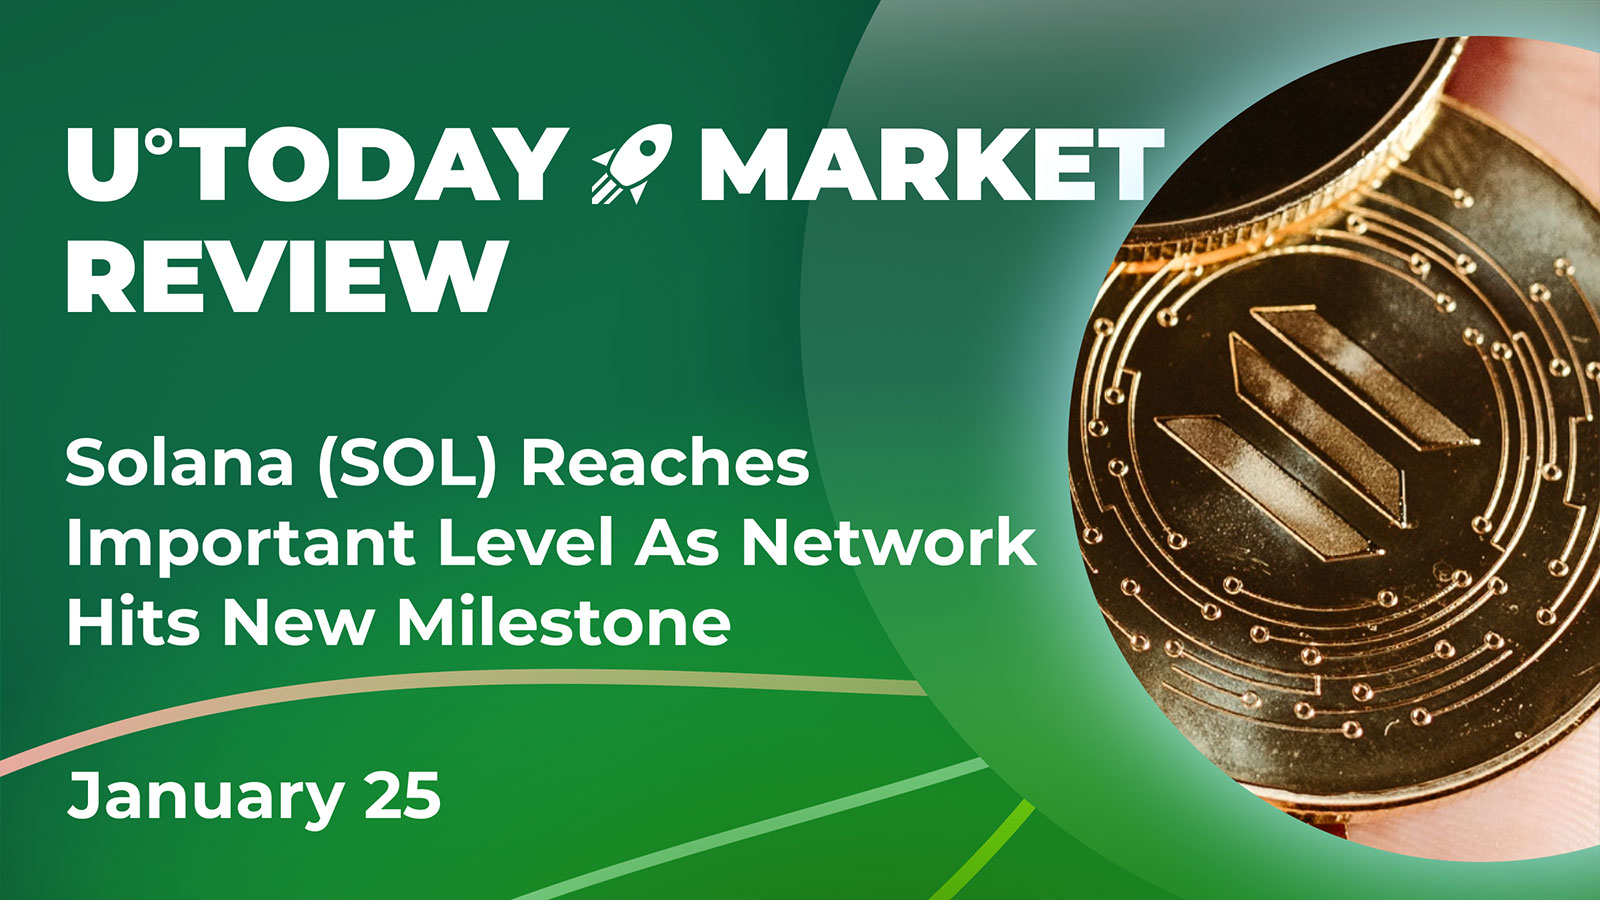 Solana (SOL) Reaches Important Level as Network Hits New Milestone: Crypto Market Review, Jan. 25